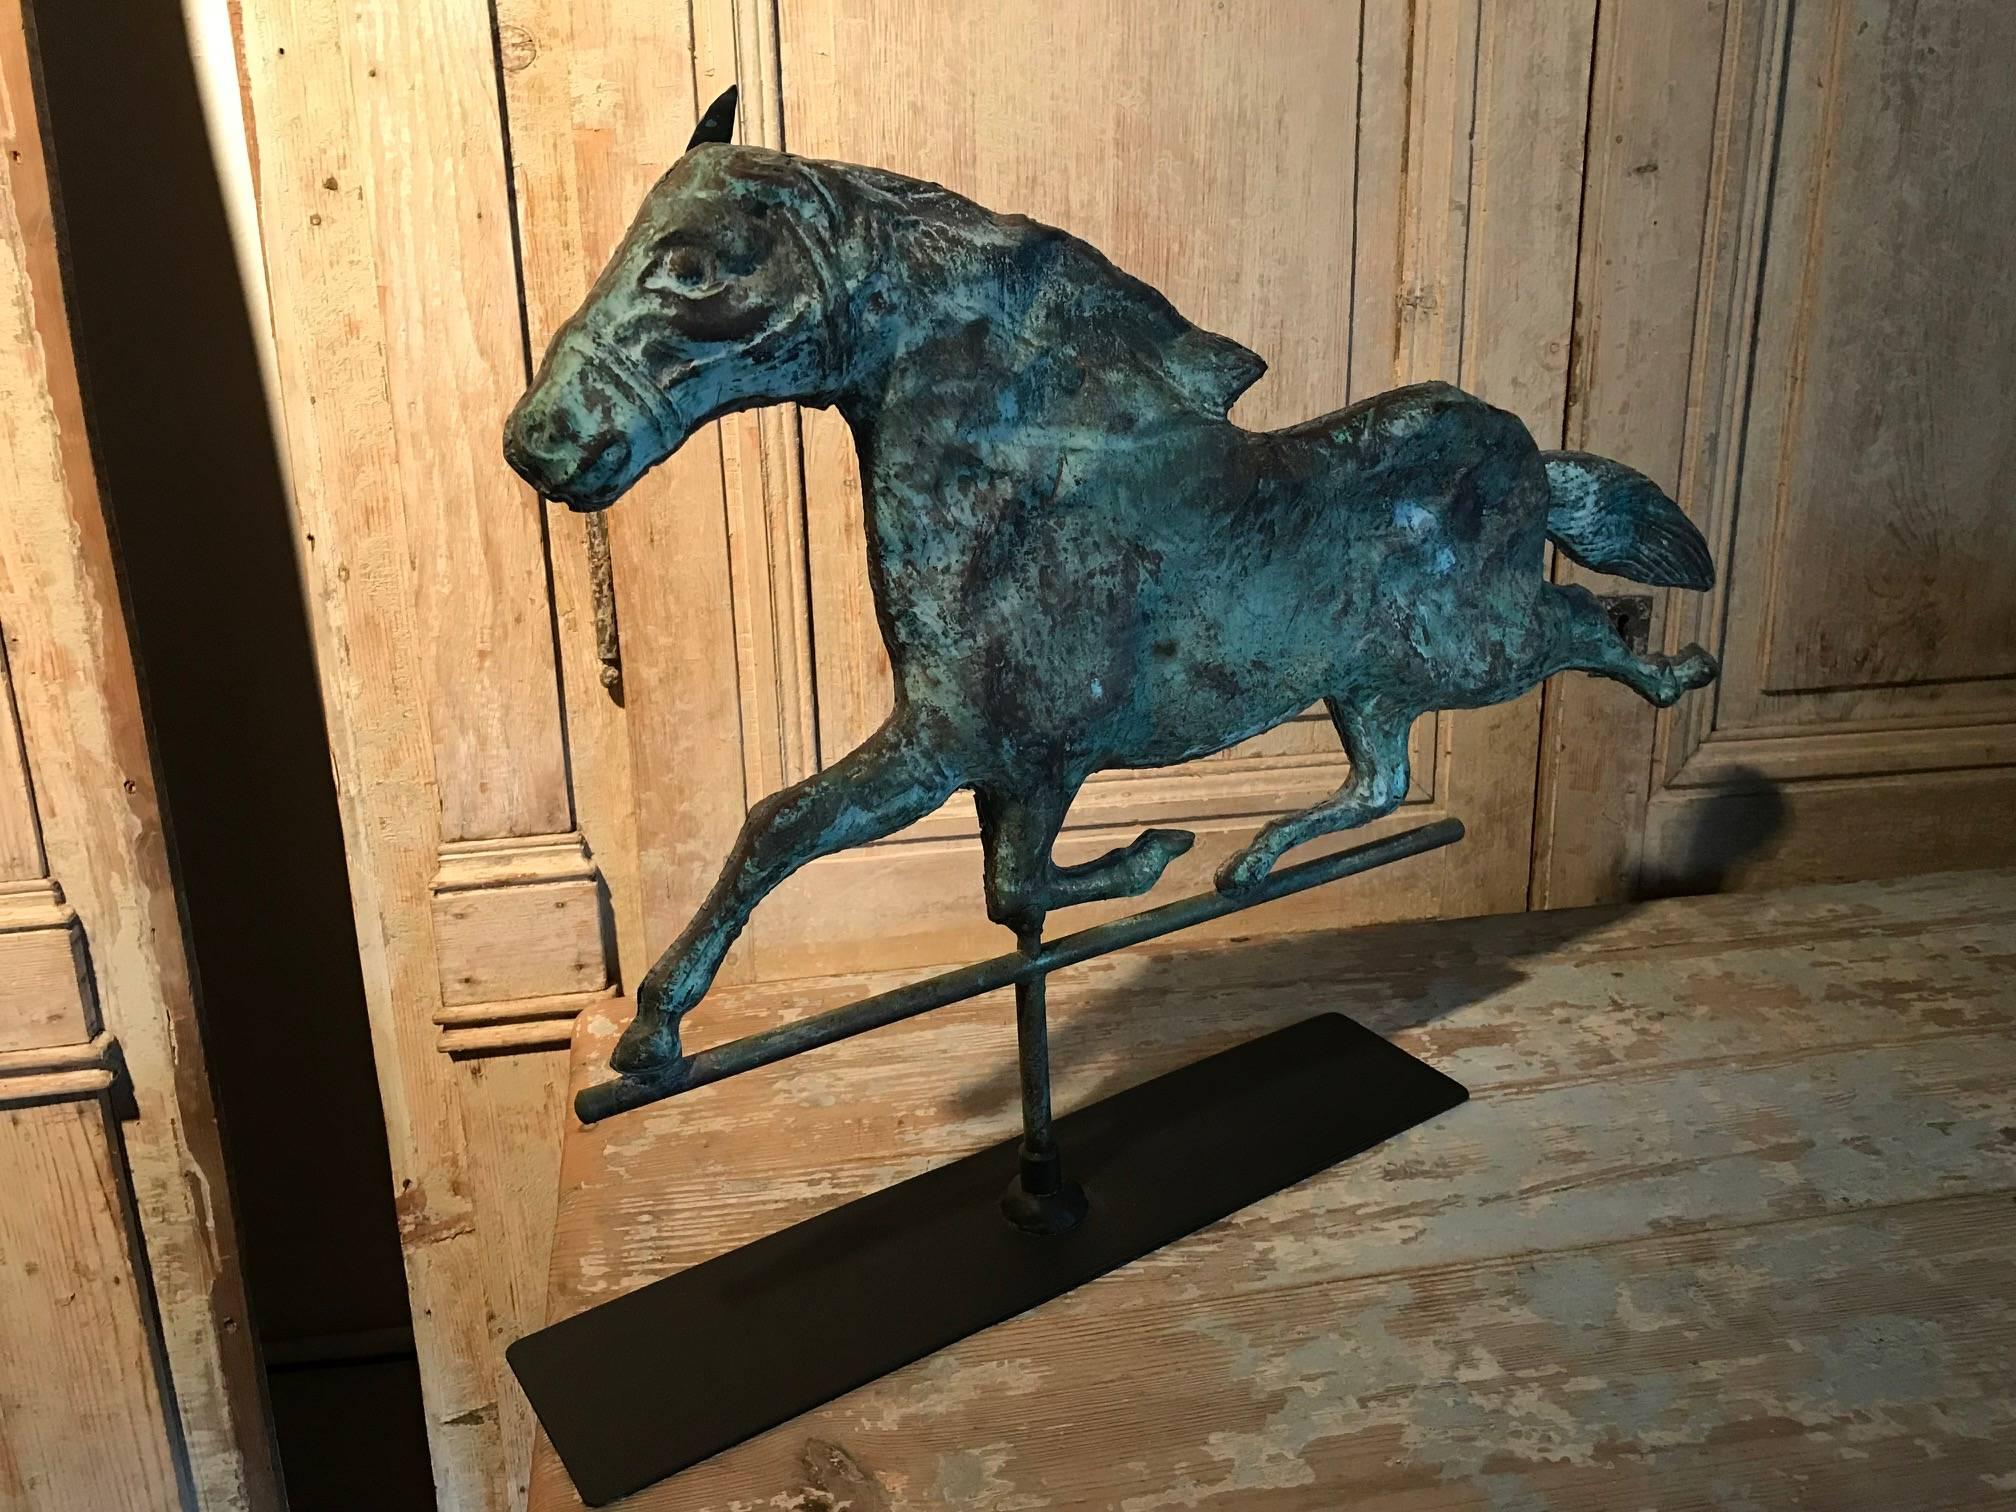 A delightful Spanish 19th century copper weathervane in the shape of a galloping horse - presented on its iron stand.